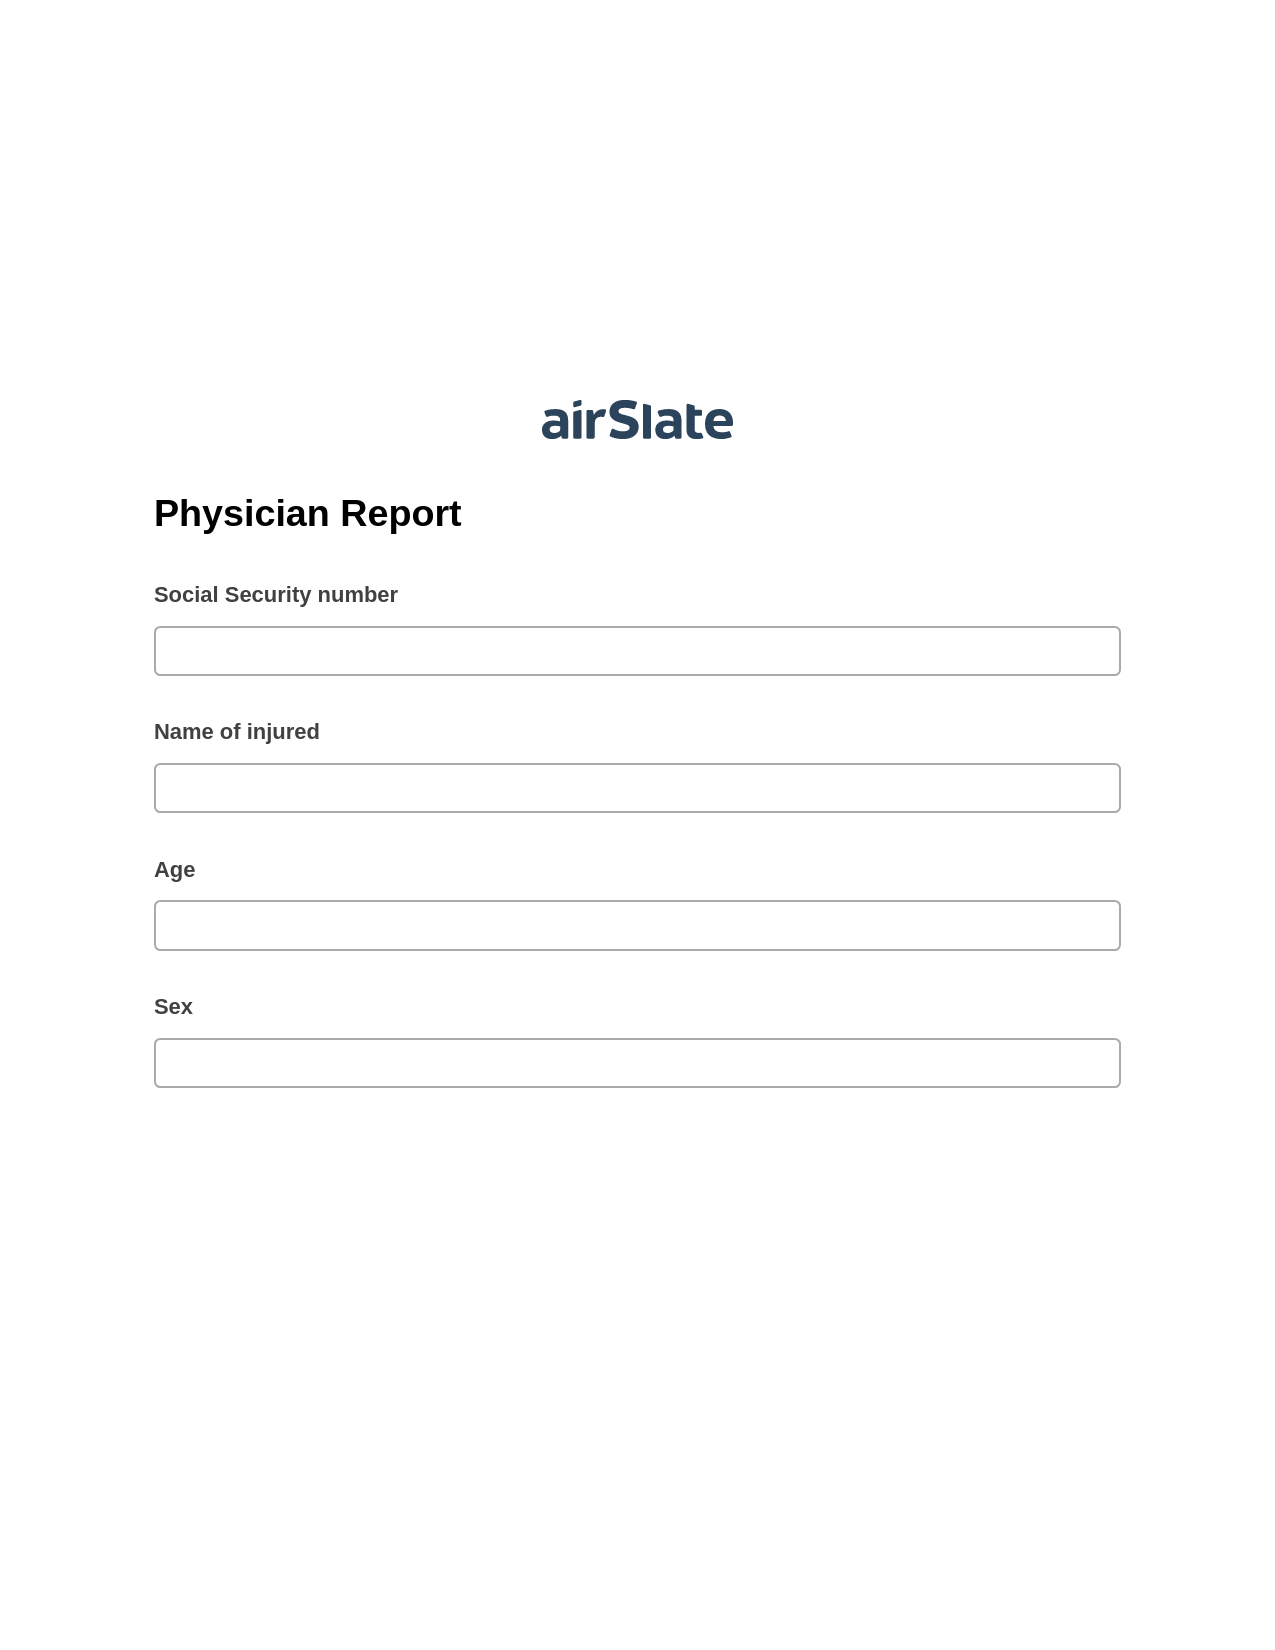 Multirole Physician Report Pre-fill from MS Dynamics 365 Records, Invoke Salesforce Process Bot, Export to Excel 365 Bot